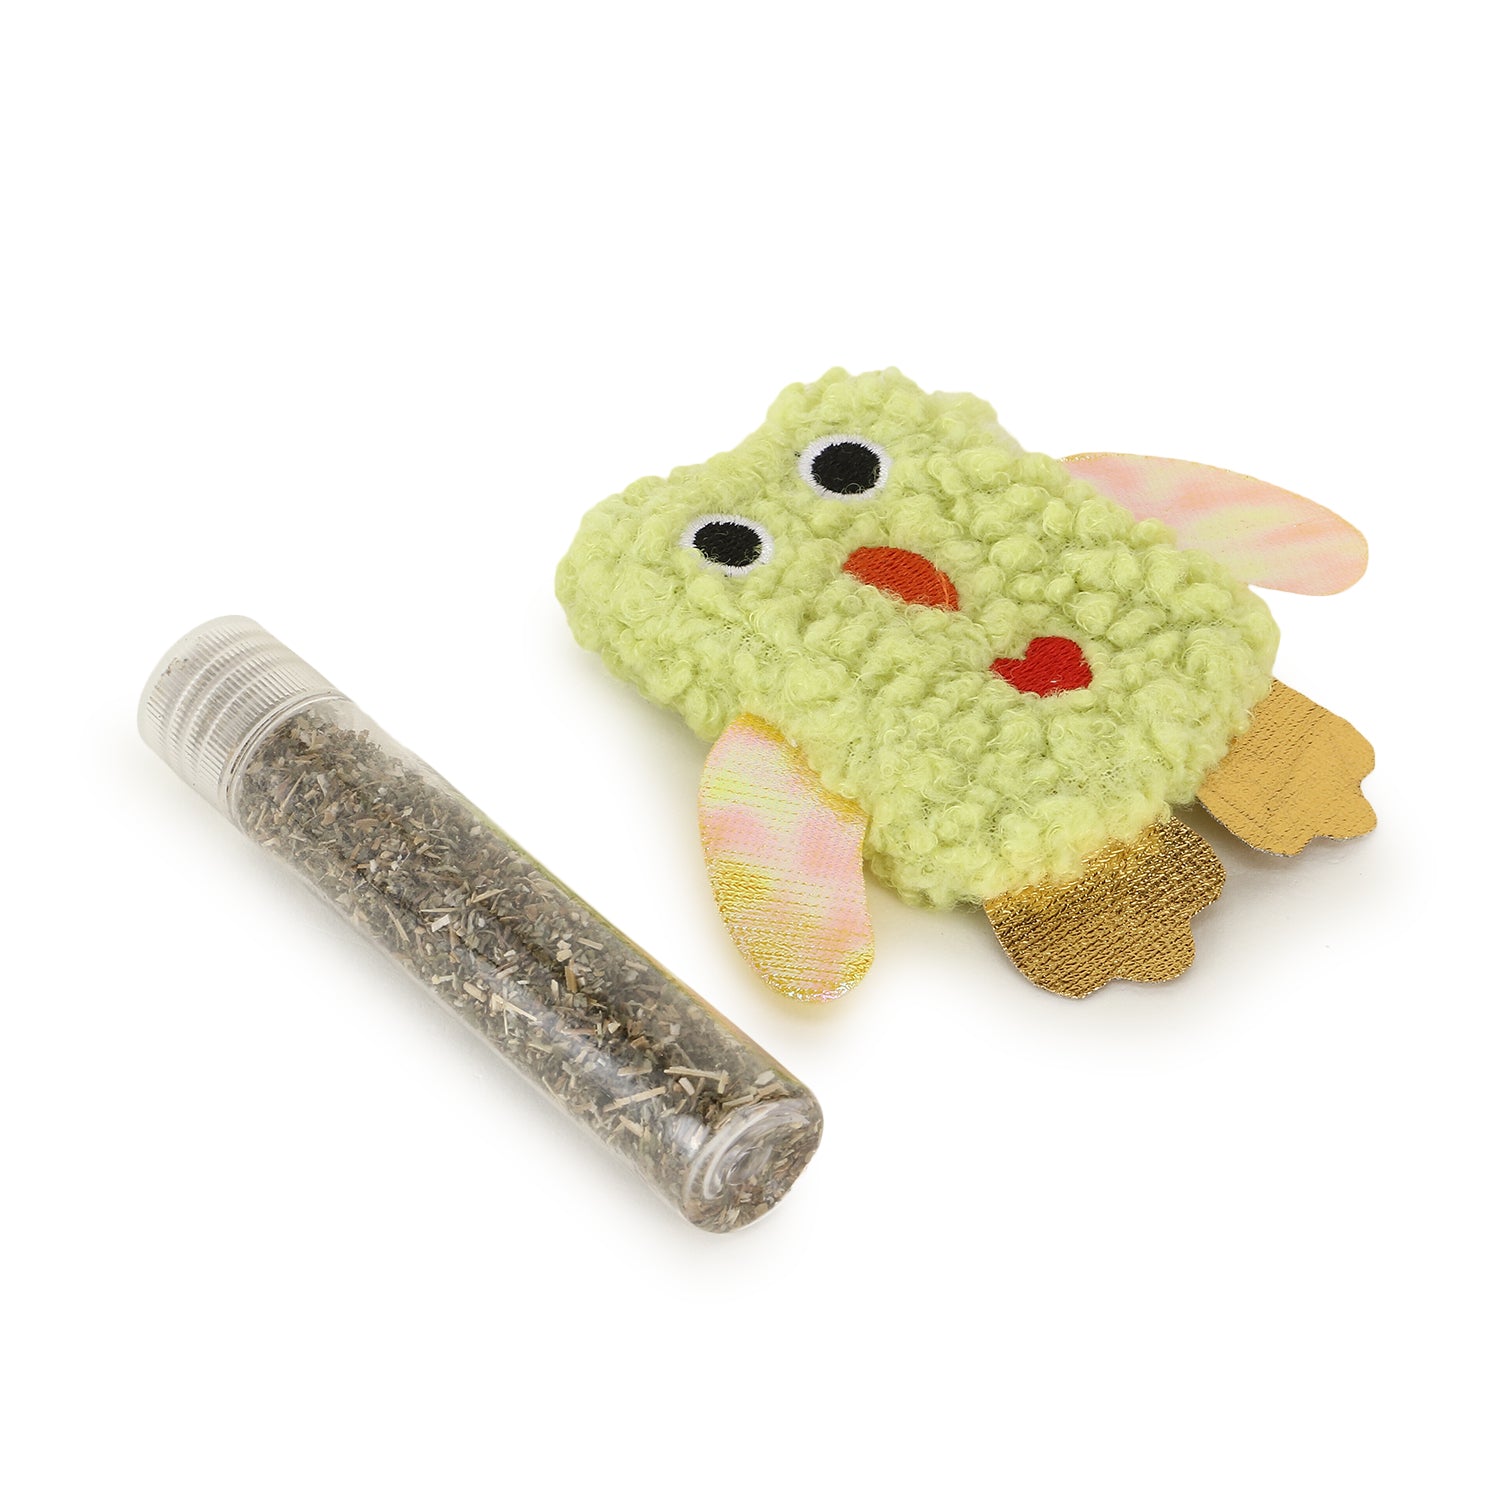 Basil - Cat Plush Toys with Cat Nip for Stuffing